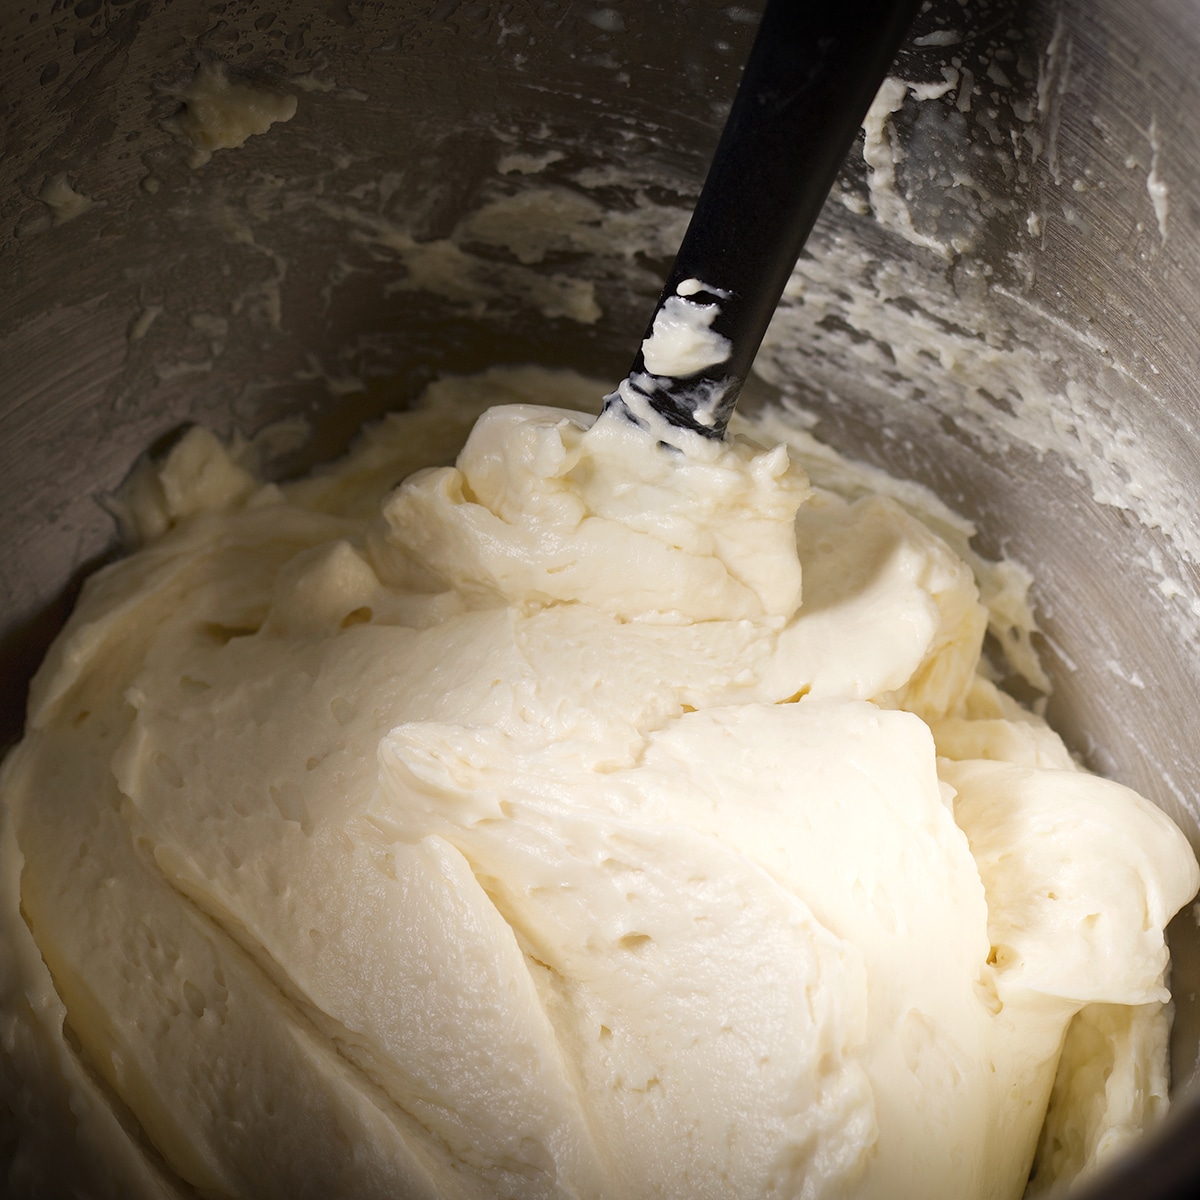 A mixing bowl filled with white chocolate ganache buttercream. A spatula is in the buttercream and you can see how smooth and creamy the frosting is.